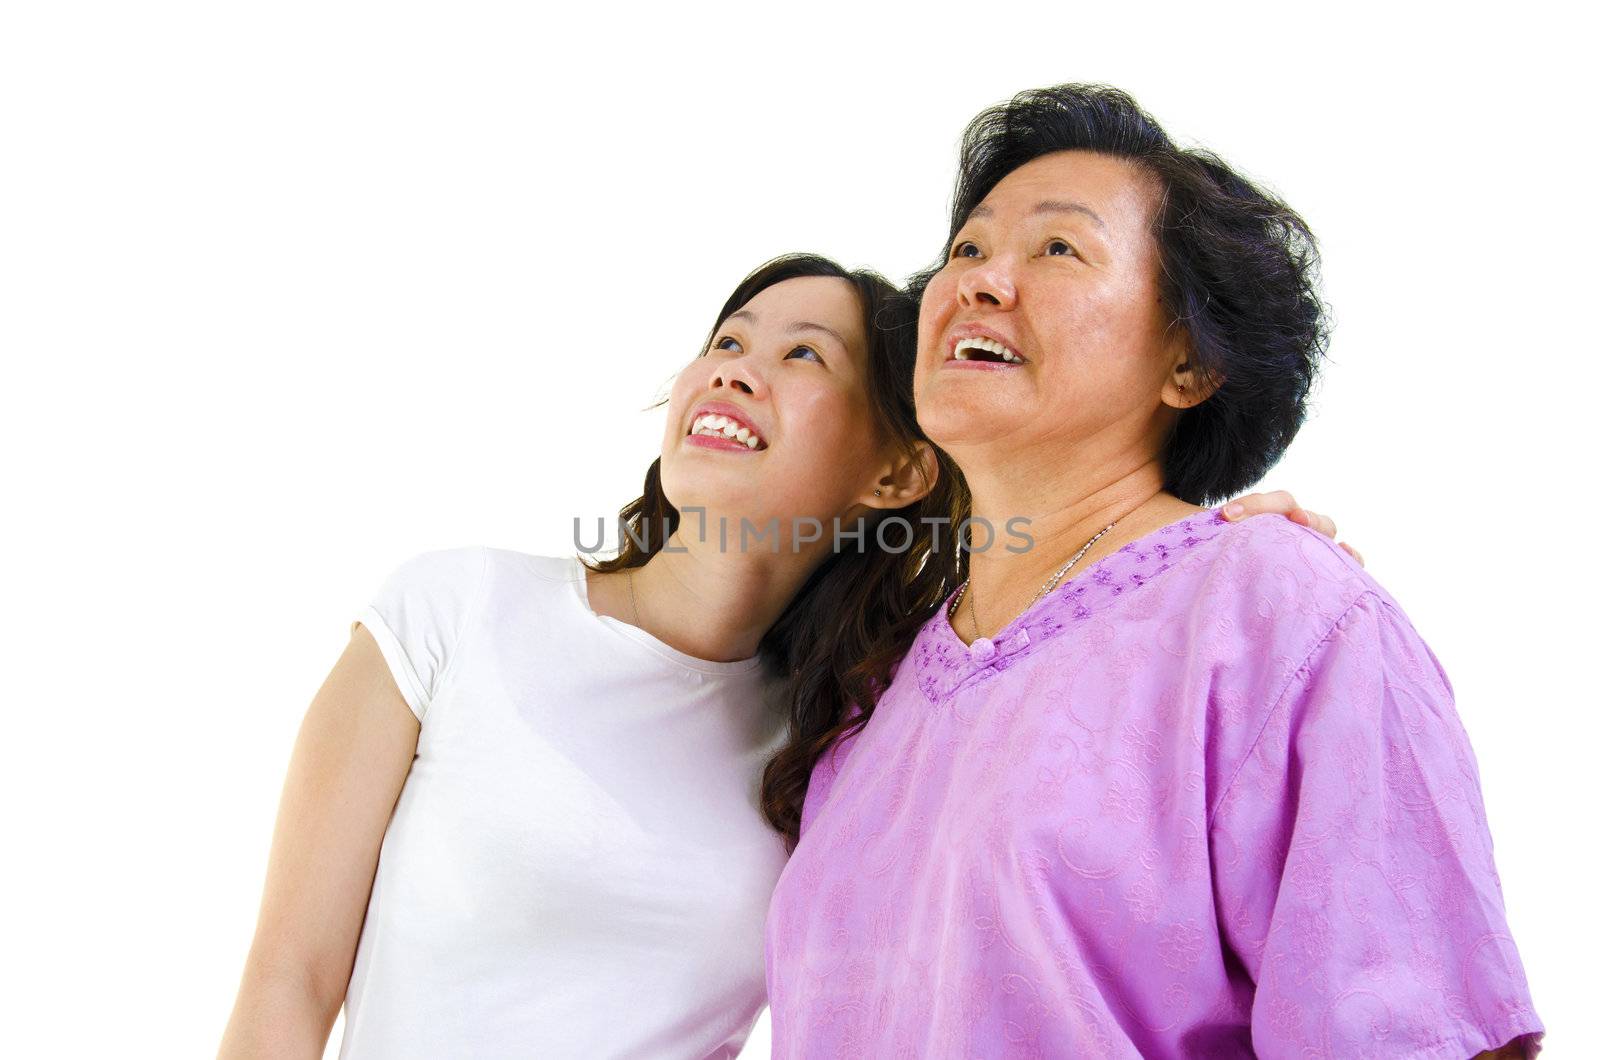 Senior Asian woman and young daughter looking away with smiling, on white background.